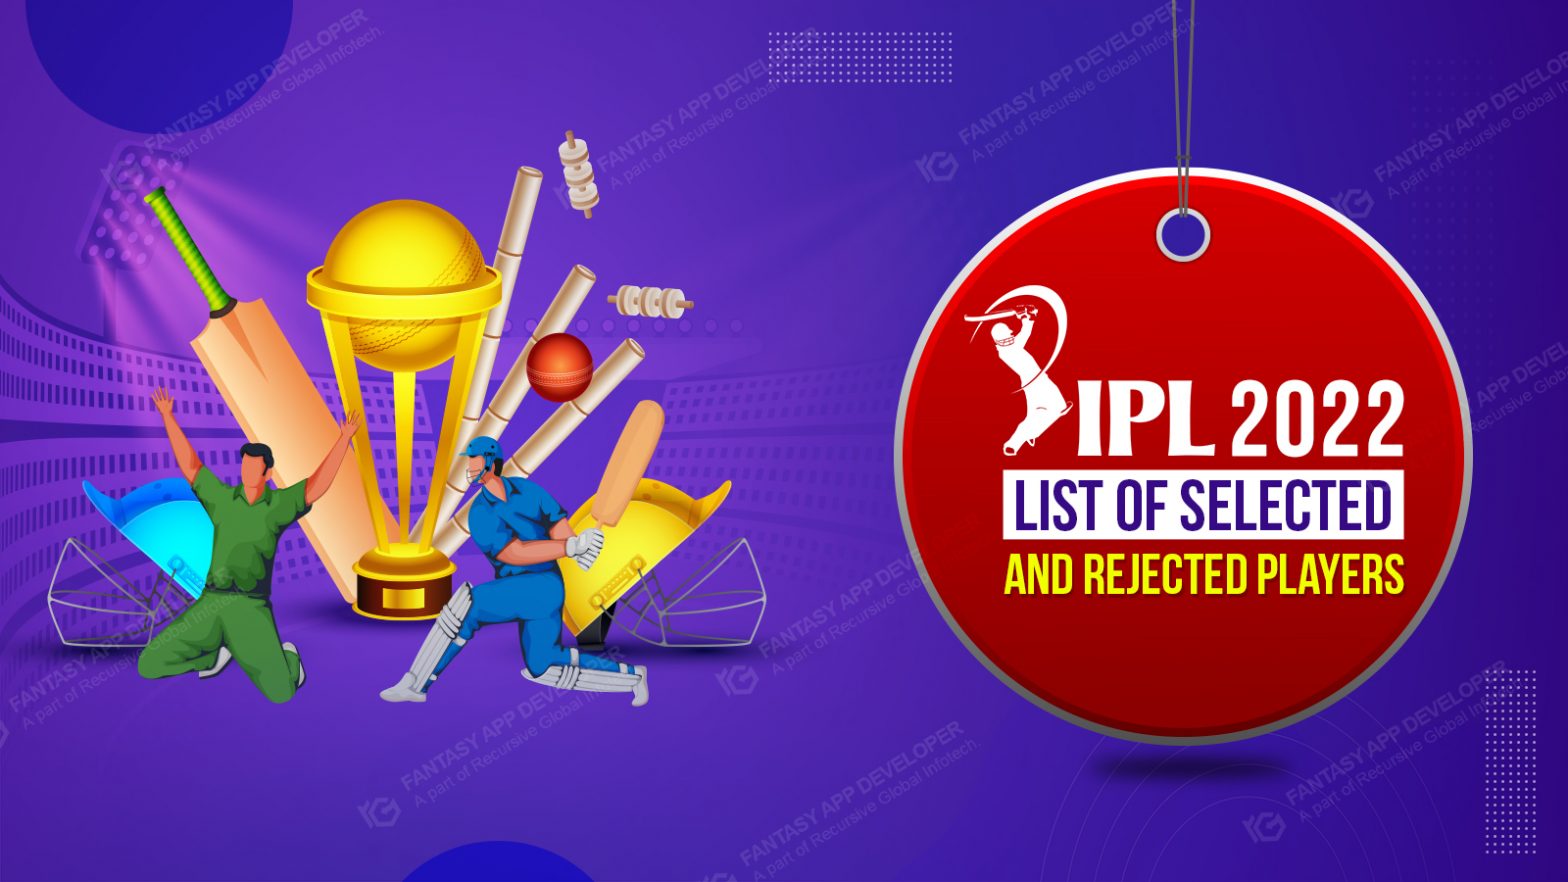 IPL 2022 - List of Selected and Rejected Players 1